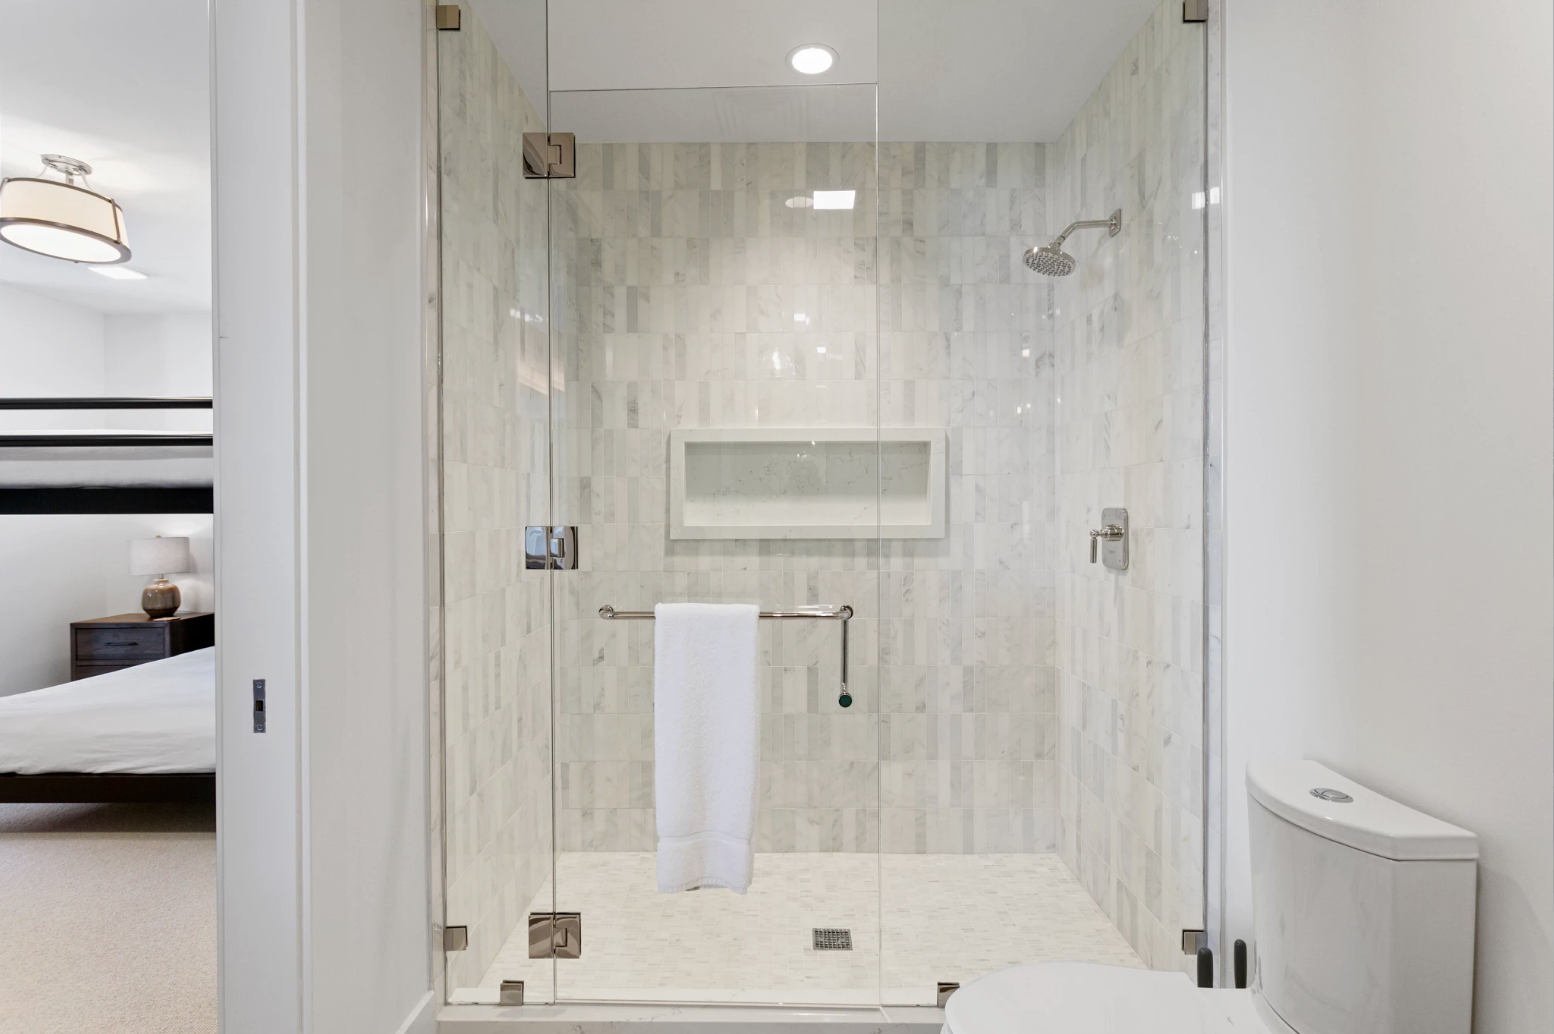 Ensuite bathroom with spacious shower.